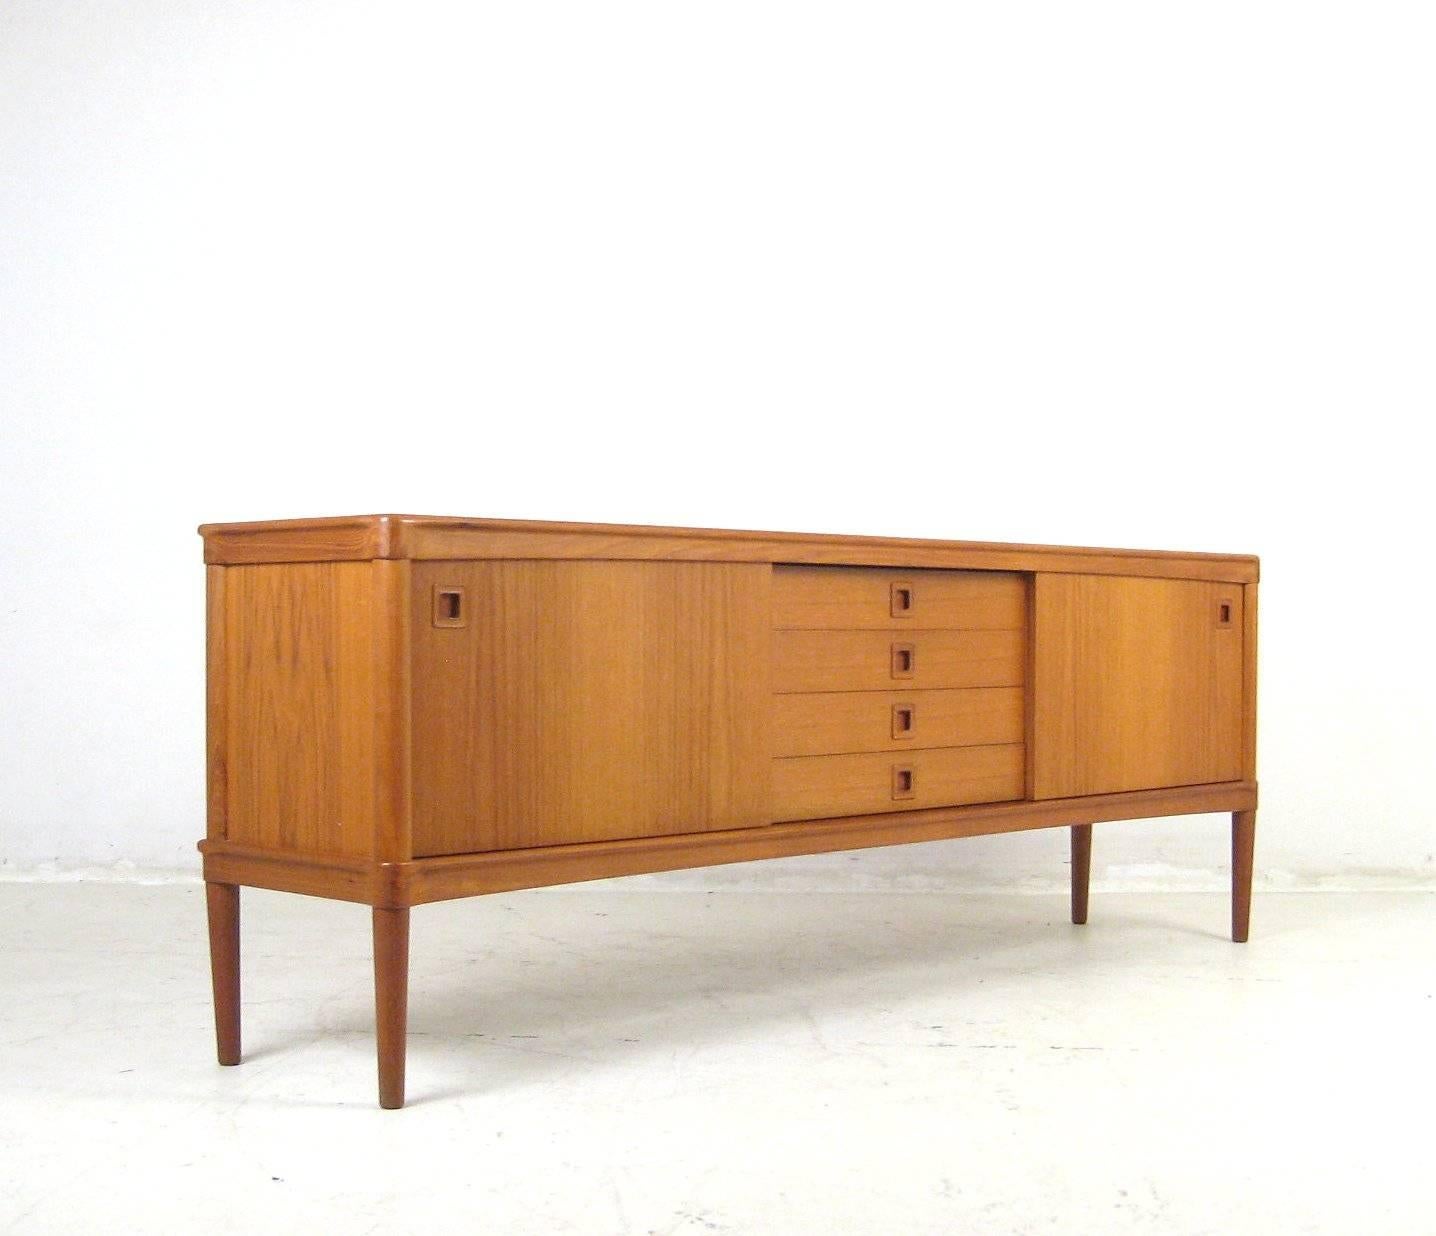 H.W. Klein teak sideboard with two sliding door cabinets each with a shelf.
Four drawers in centre. Signed with stickers. The back of the sideboard is also finished.